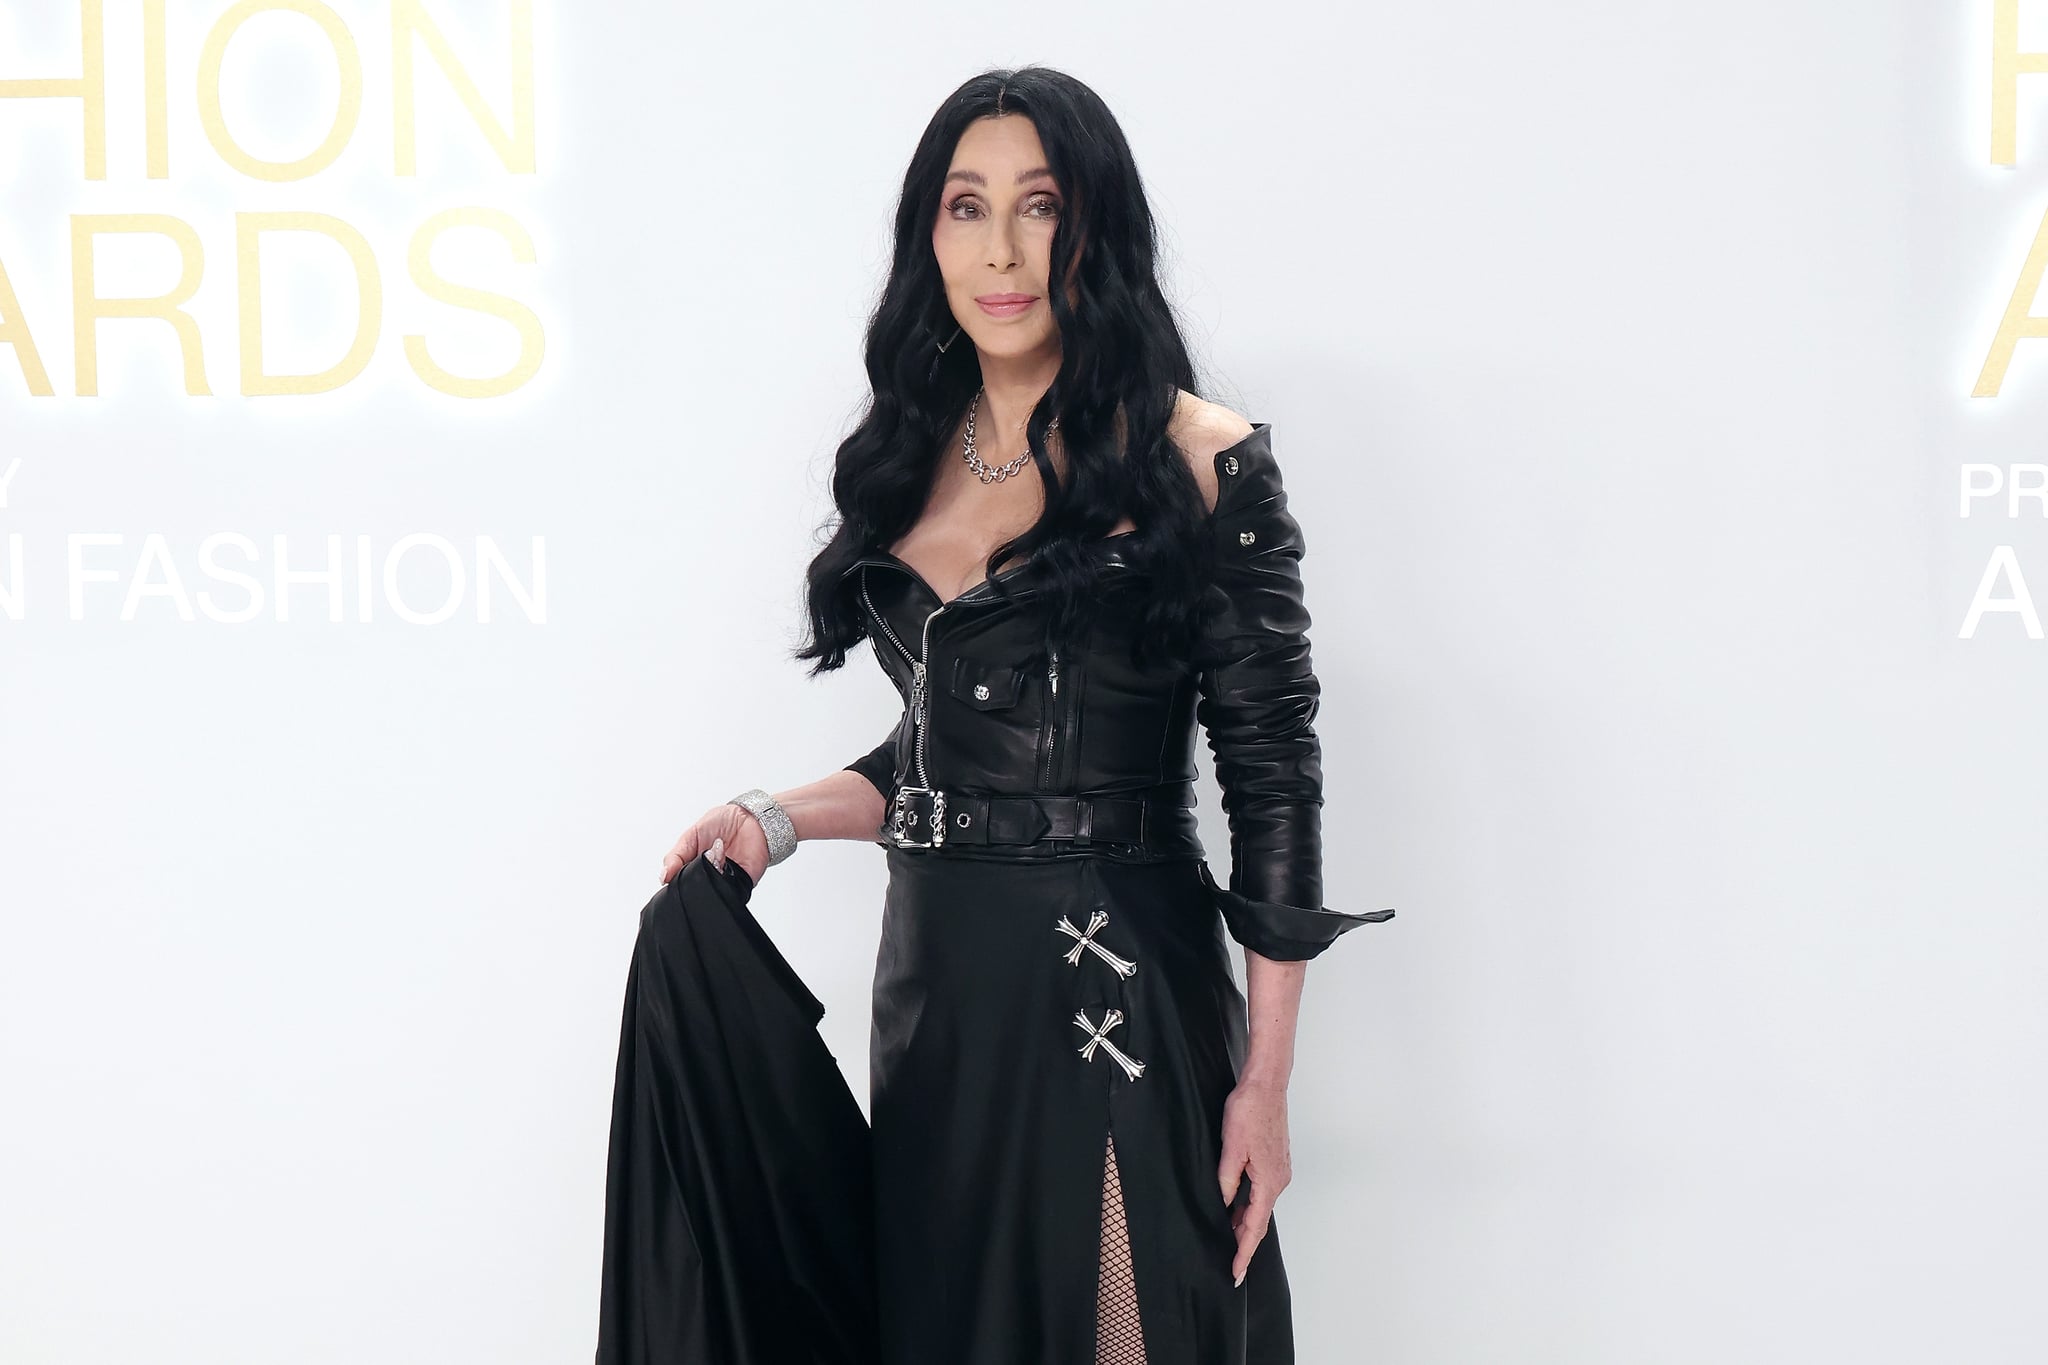 NEW YORK, NEW YORK - NOVEMBER 07: Cher attends the 2022 CFDA Awards at Casa Cipriani on November 07, 2022 in New York City. (Photo by Taylor Hill/FilmMagic)